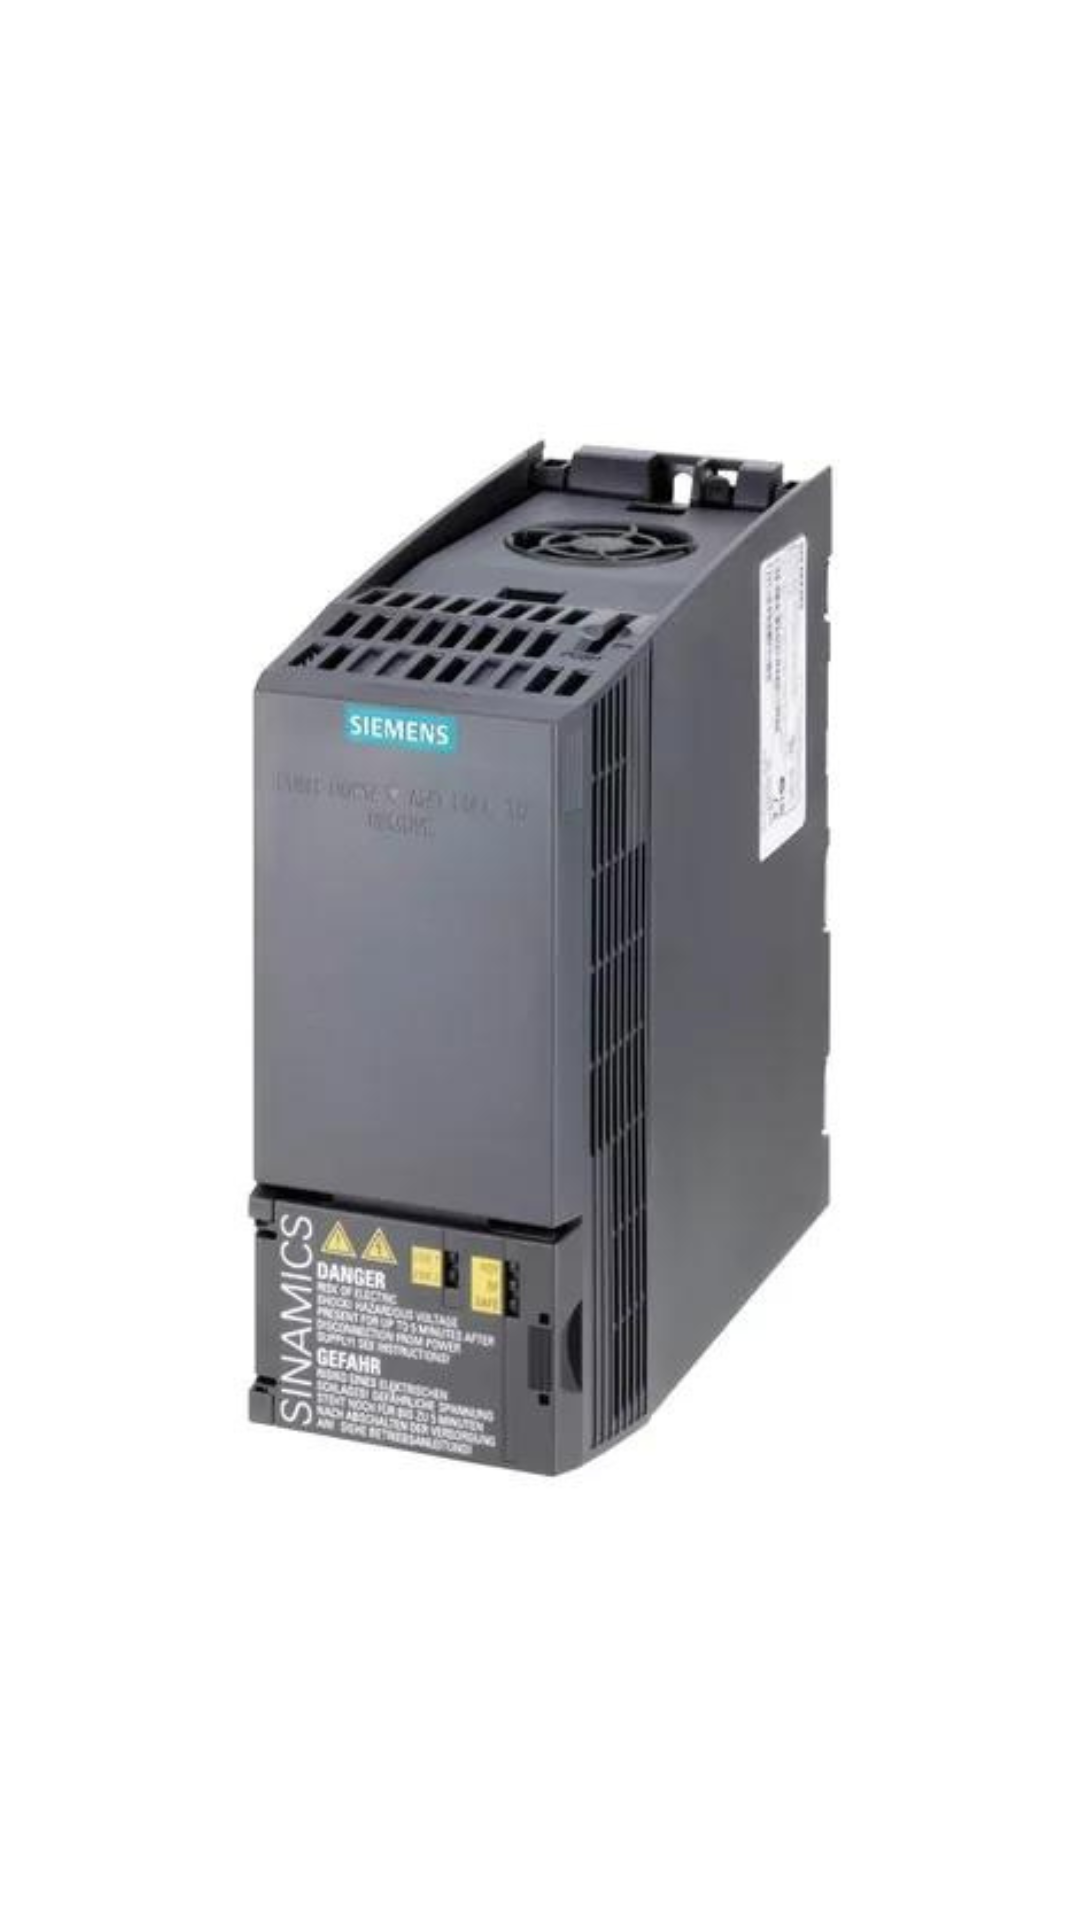 6SL3210-1KE12-3UF2 Siemens SINAMICS G120C RATED POWER 0,75KW WITH 150% OVERLOAD FOR 3 SEC 3AC380-480V +10/-20% 47-63HZ UNFILTERED I/O-INTERFACE: 6DI, 2DO,1AI,1AO SAFE TORQUE OFF INTEGRATED FIELDBUS: PROFINET-PN PROTECTION: IP20/